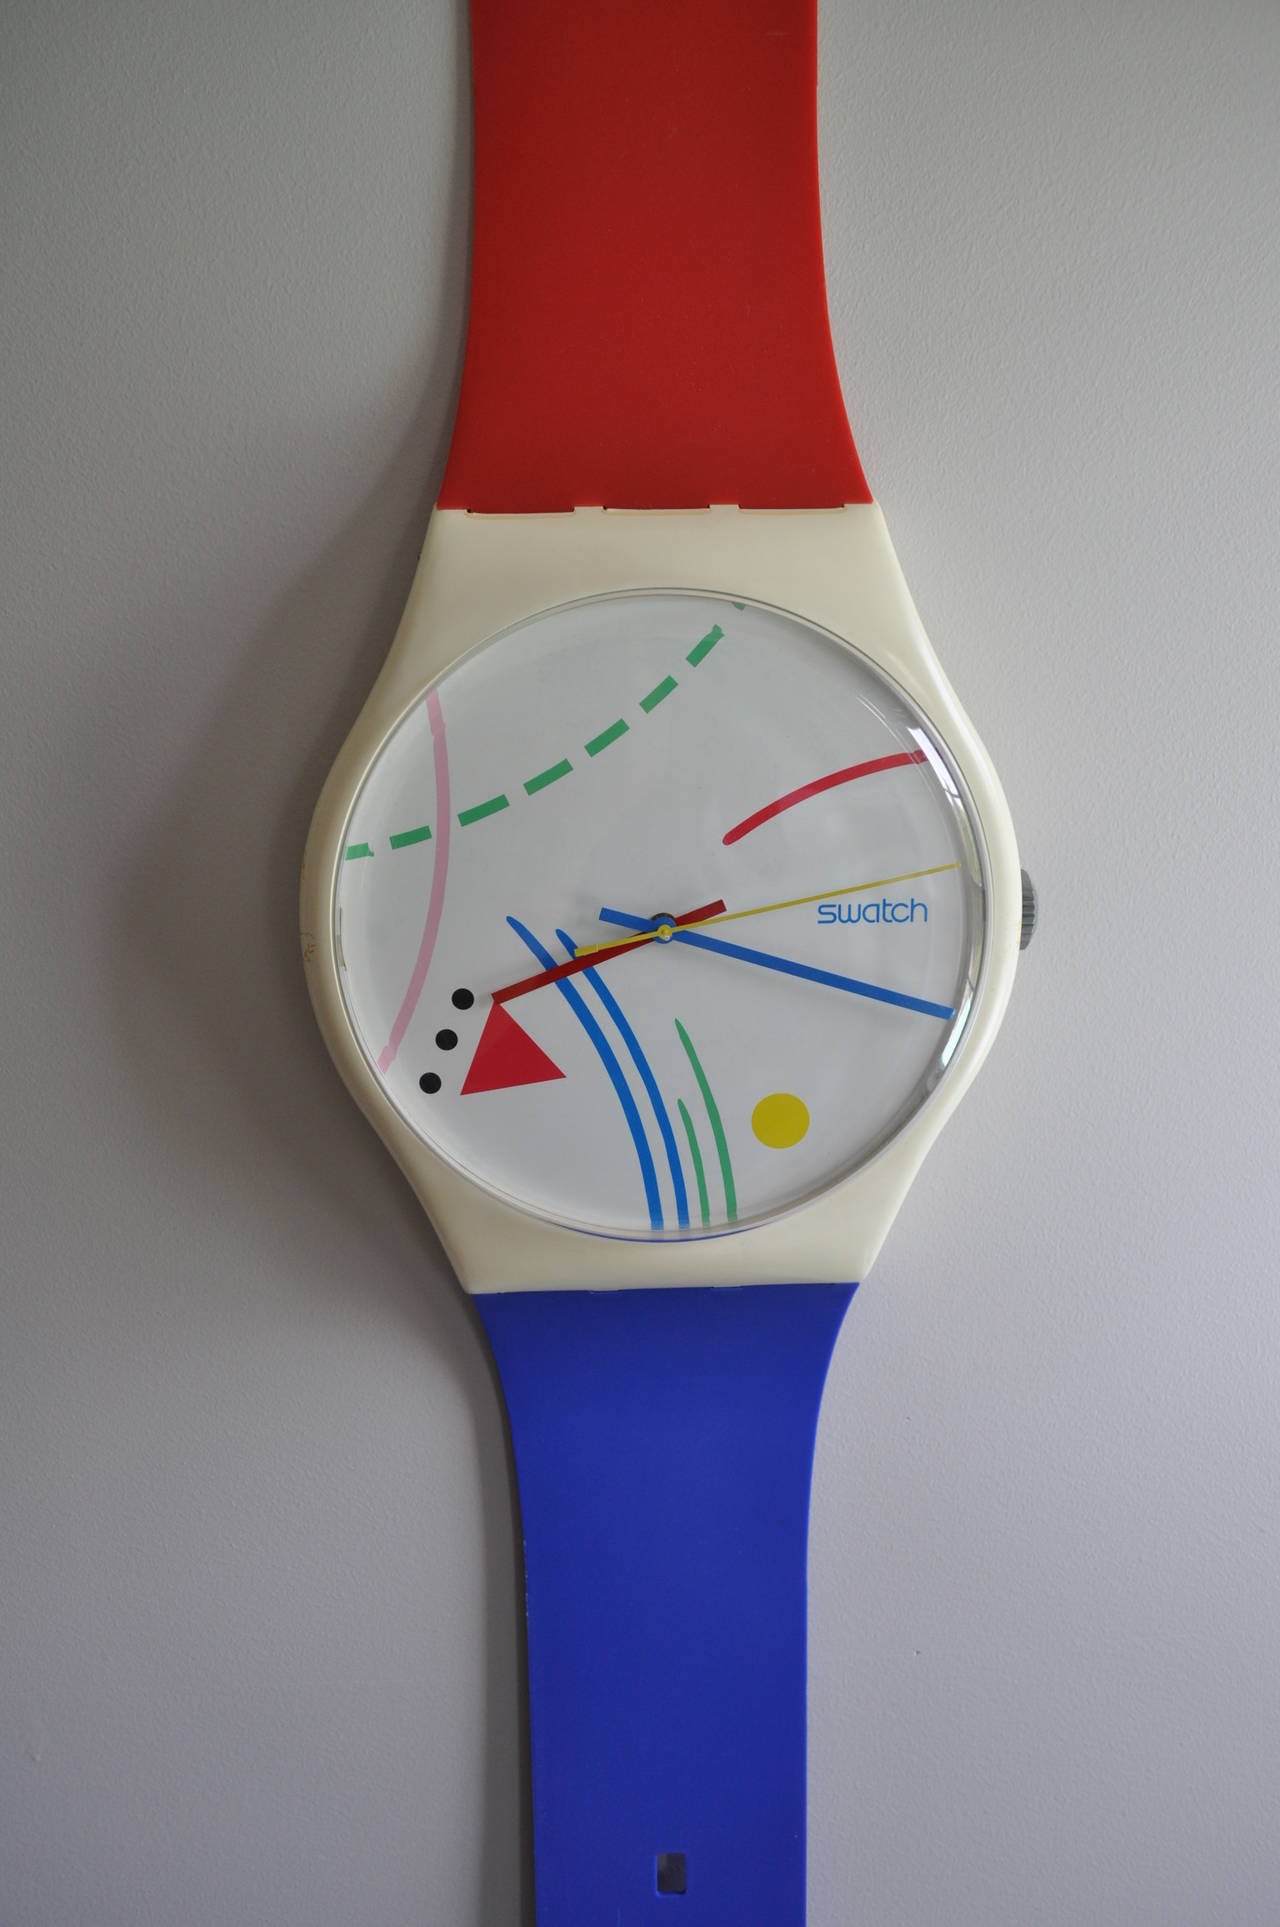 Iconic 1980's Swatch Watch Pop Art Wall Clock.  This wall mounted sculptural piece features bright and bold colors in the style of Vassily Kandinsky style primary red, blue, yellow, black and white colors.  Can be displayed with or without the